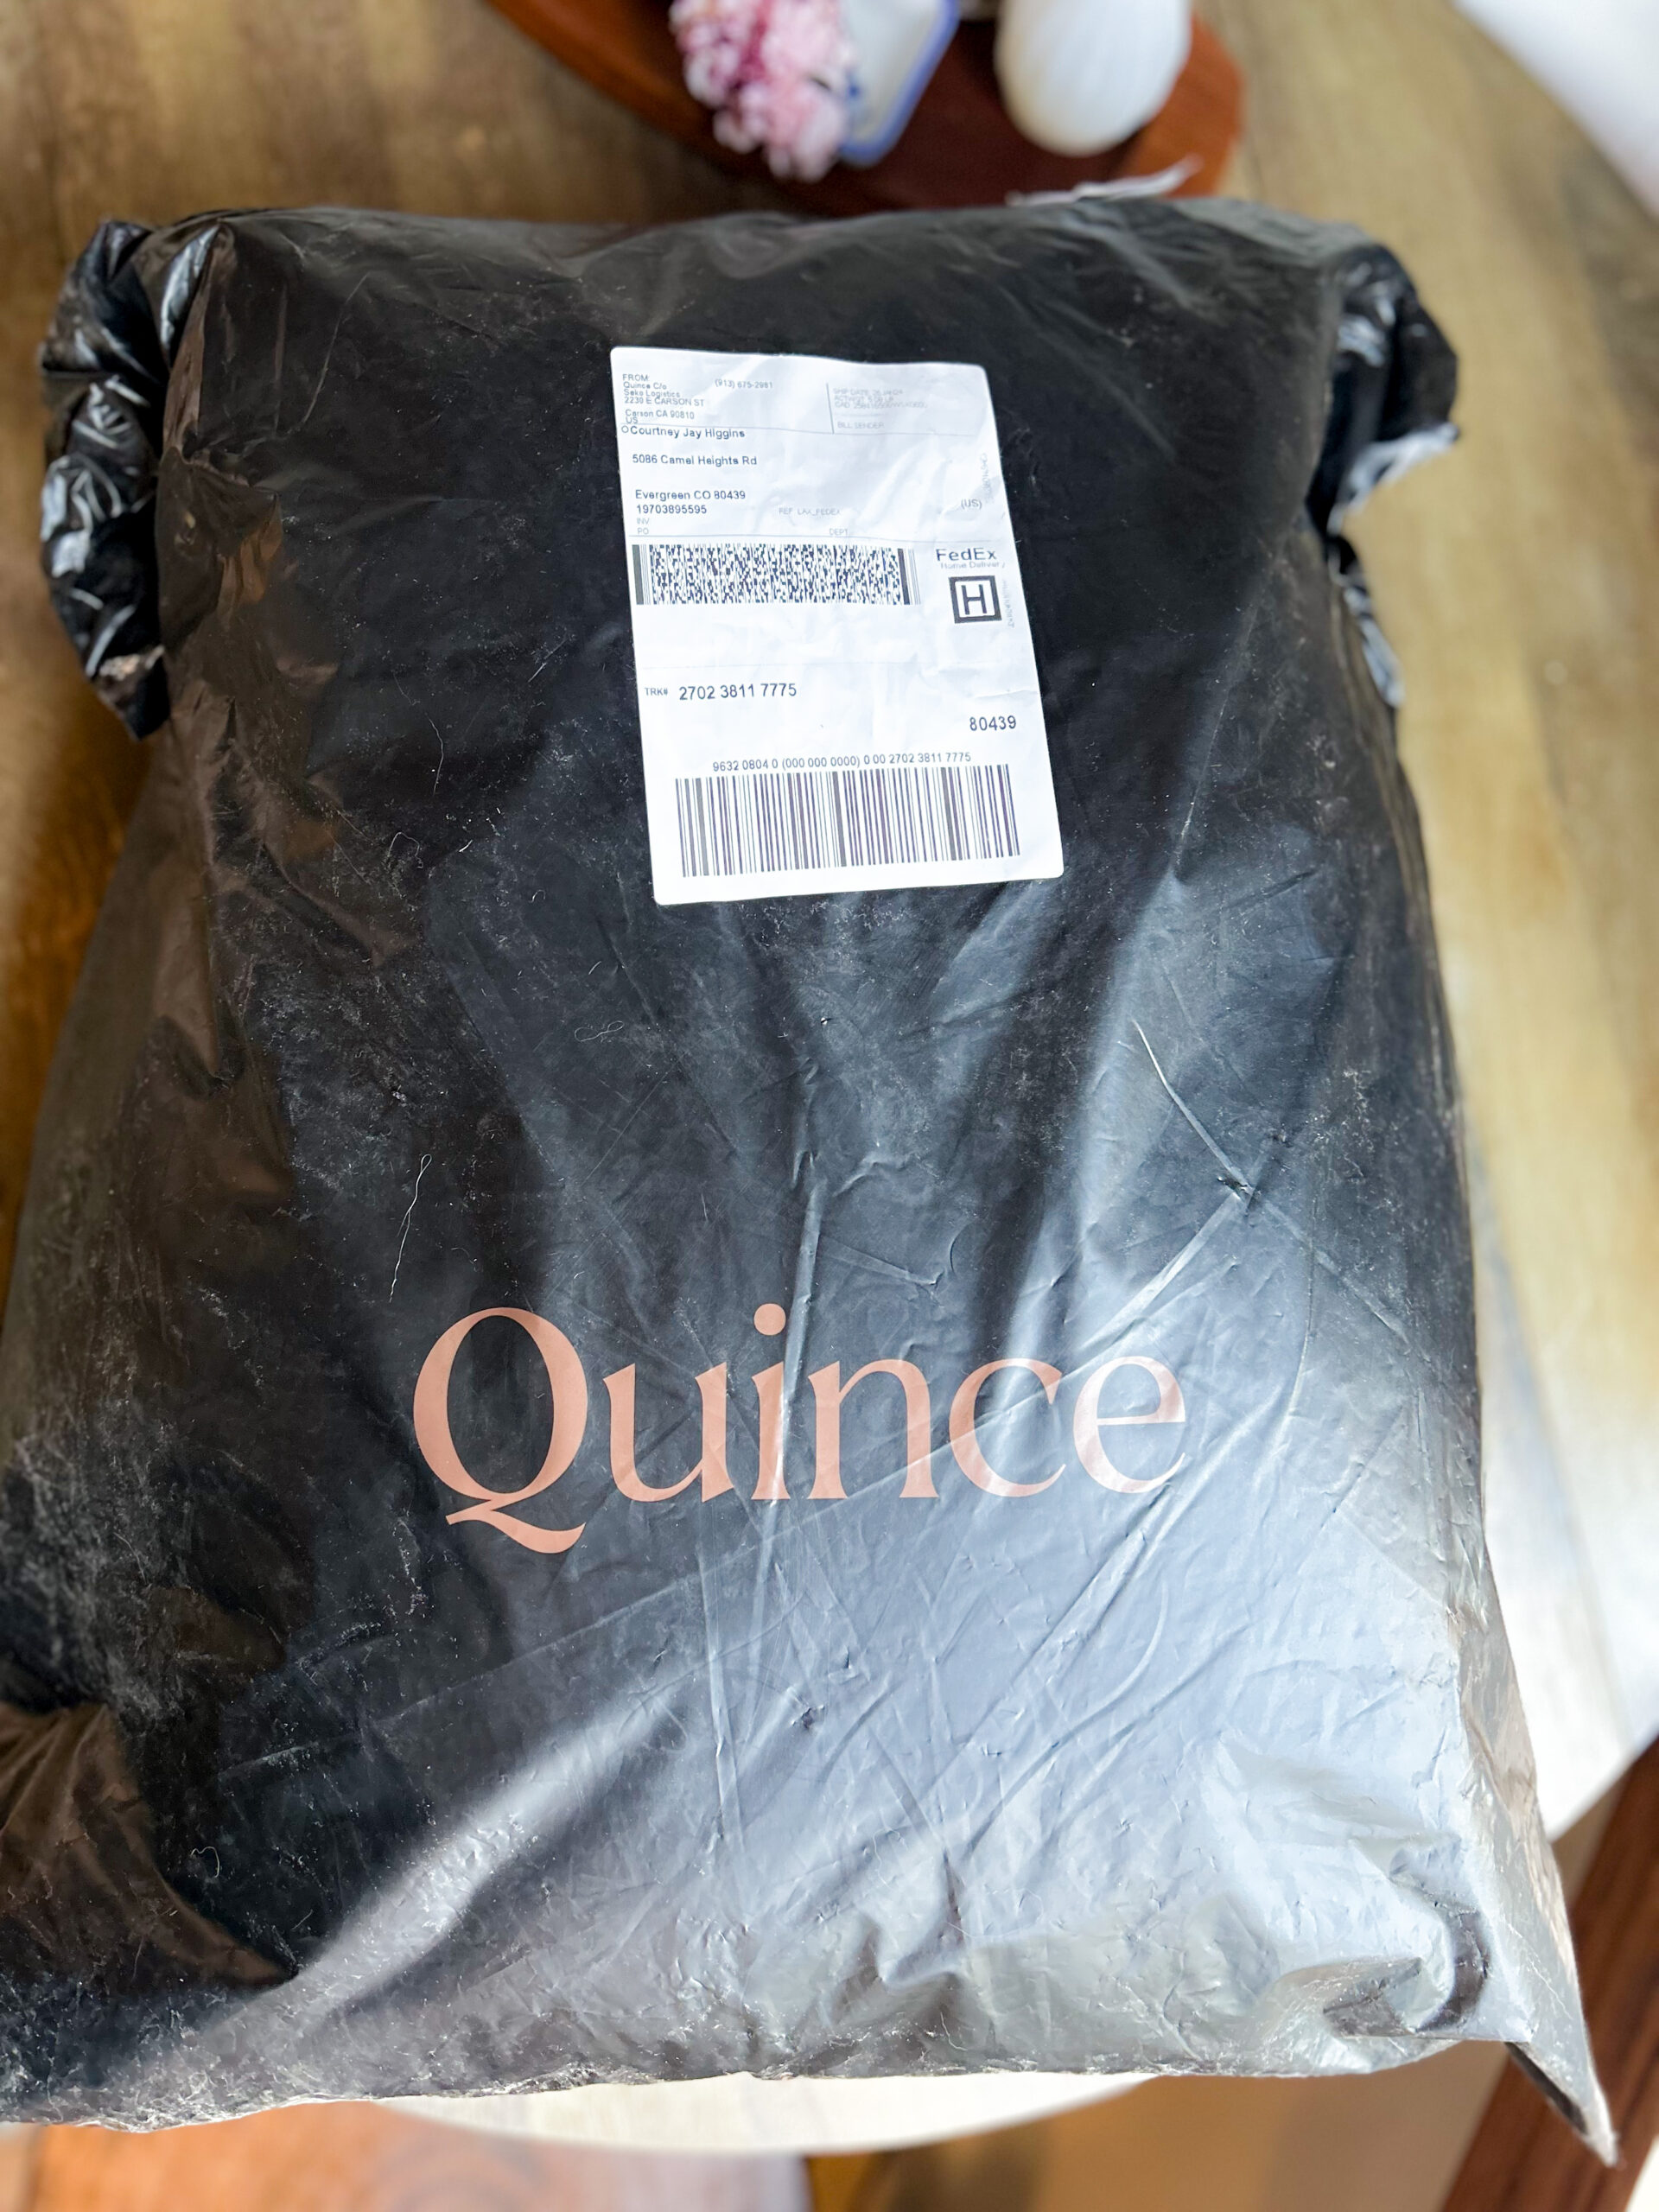 A bag with the word quince on it sitting on a table.